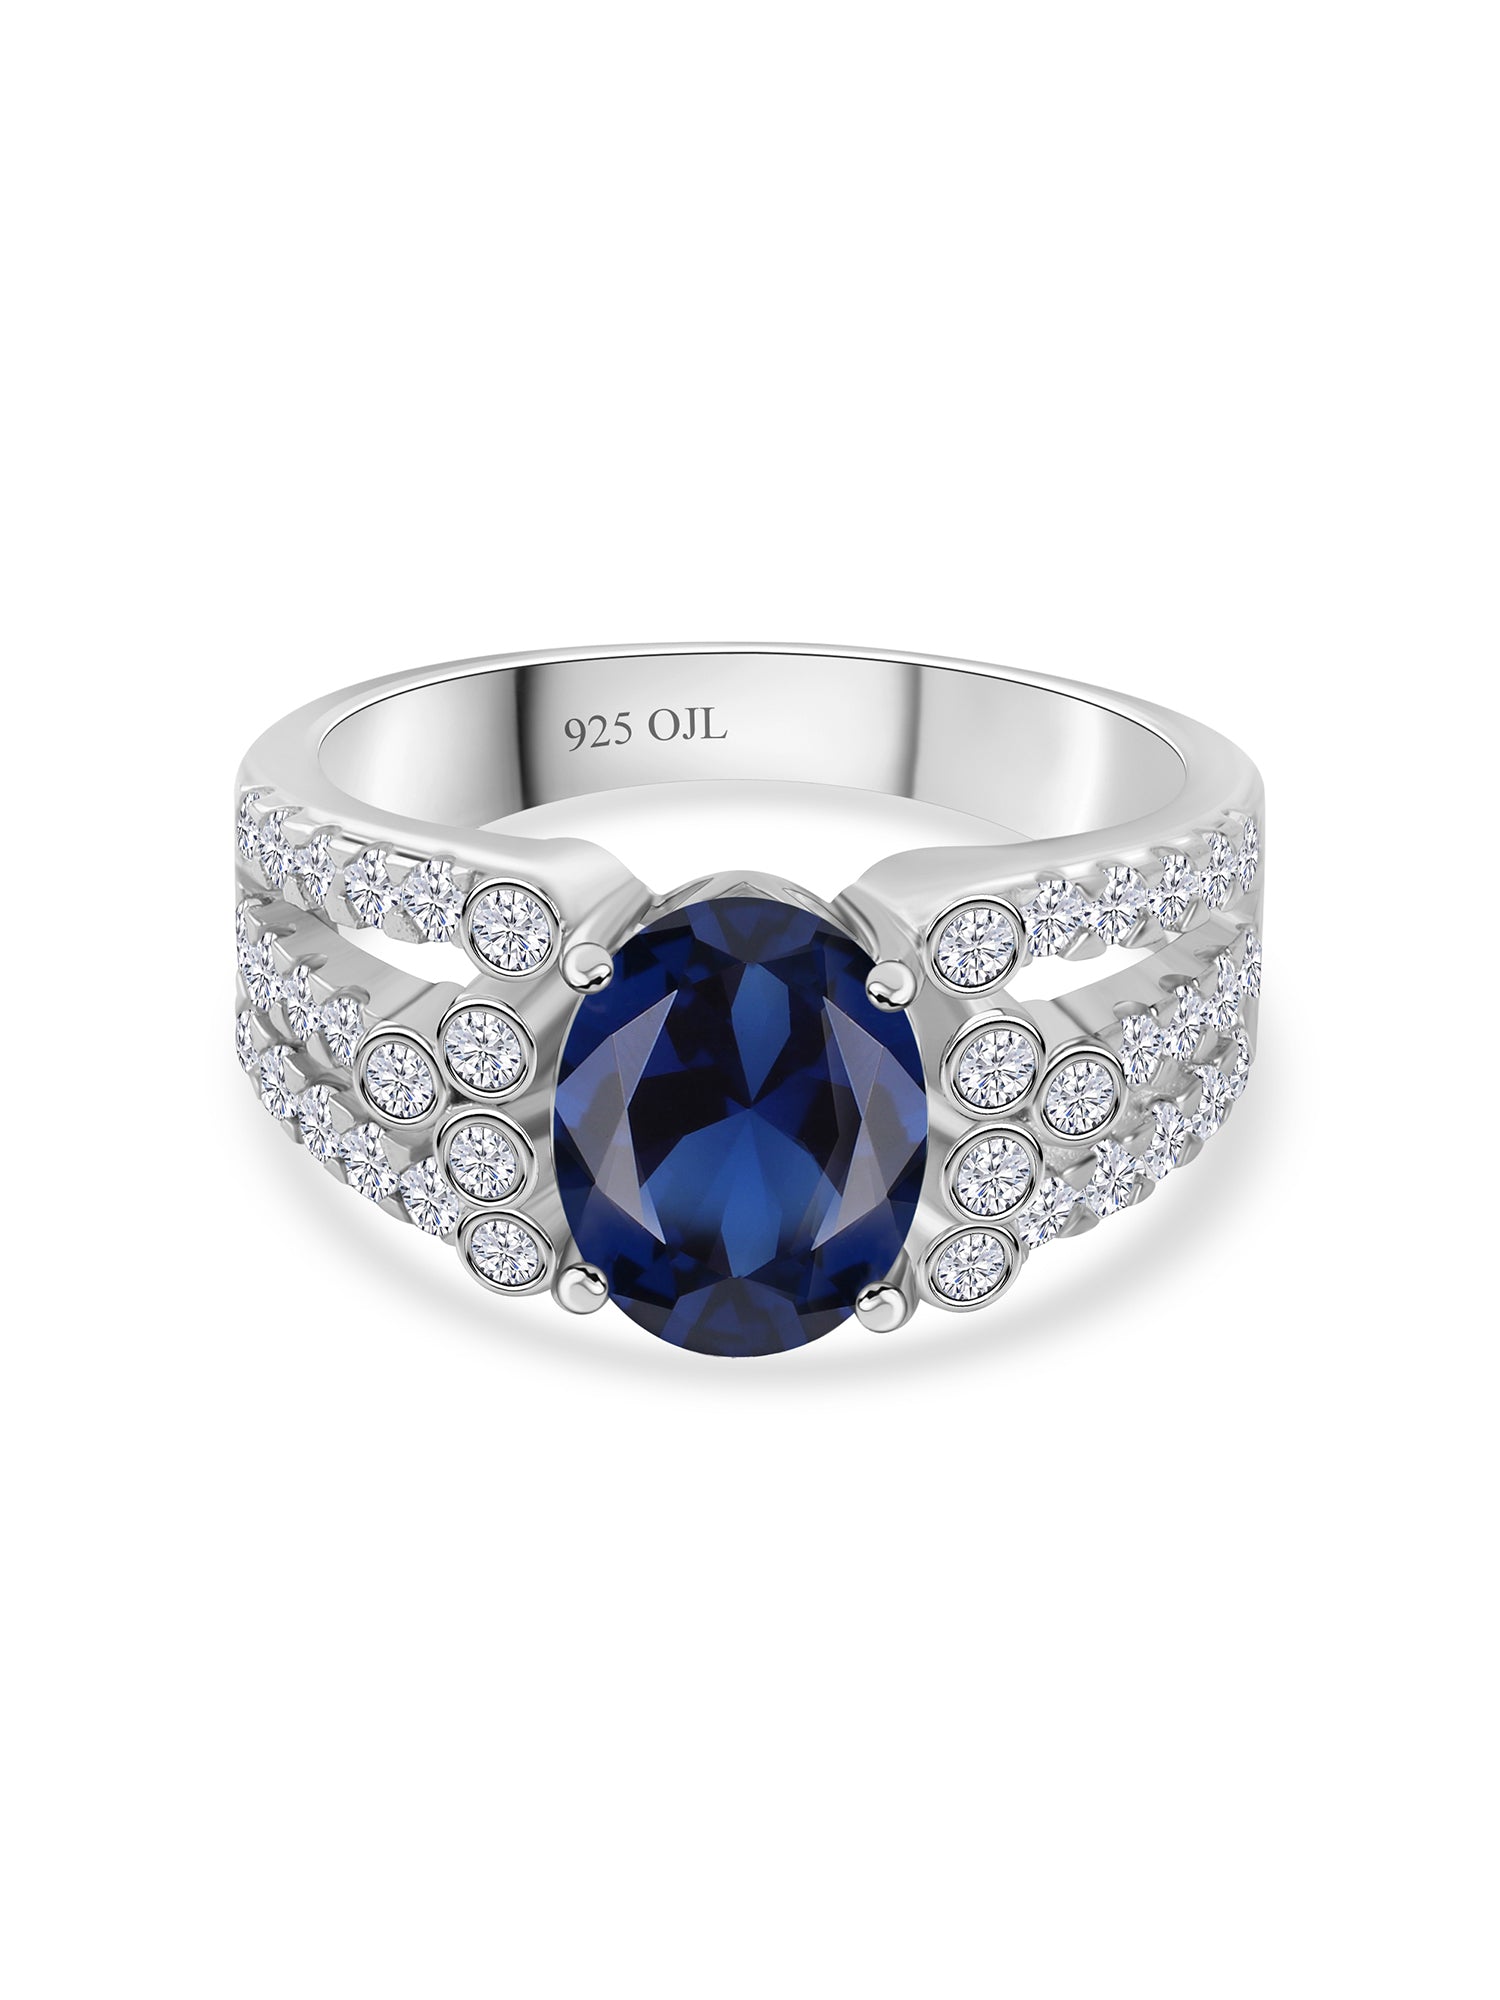 2.5 CARAT OVAL SAPPHIRE SOLITAIRE MULTI ROW RING